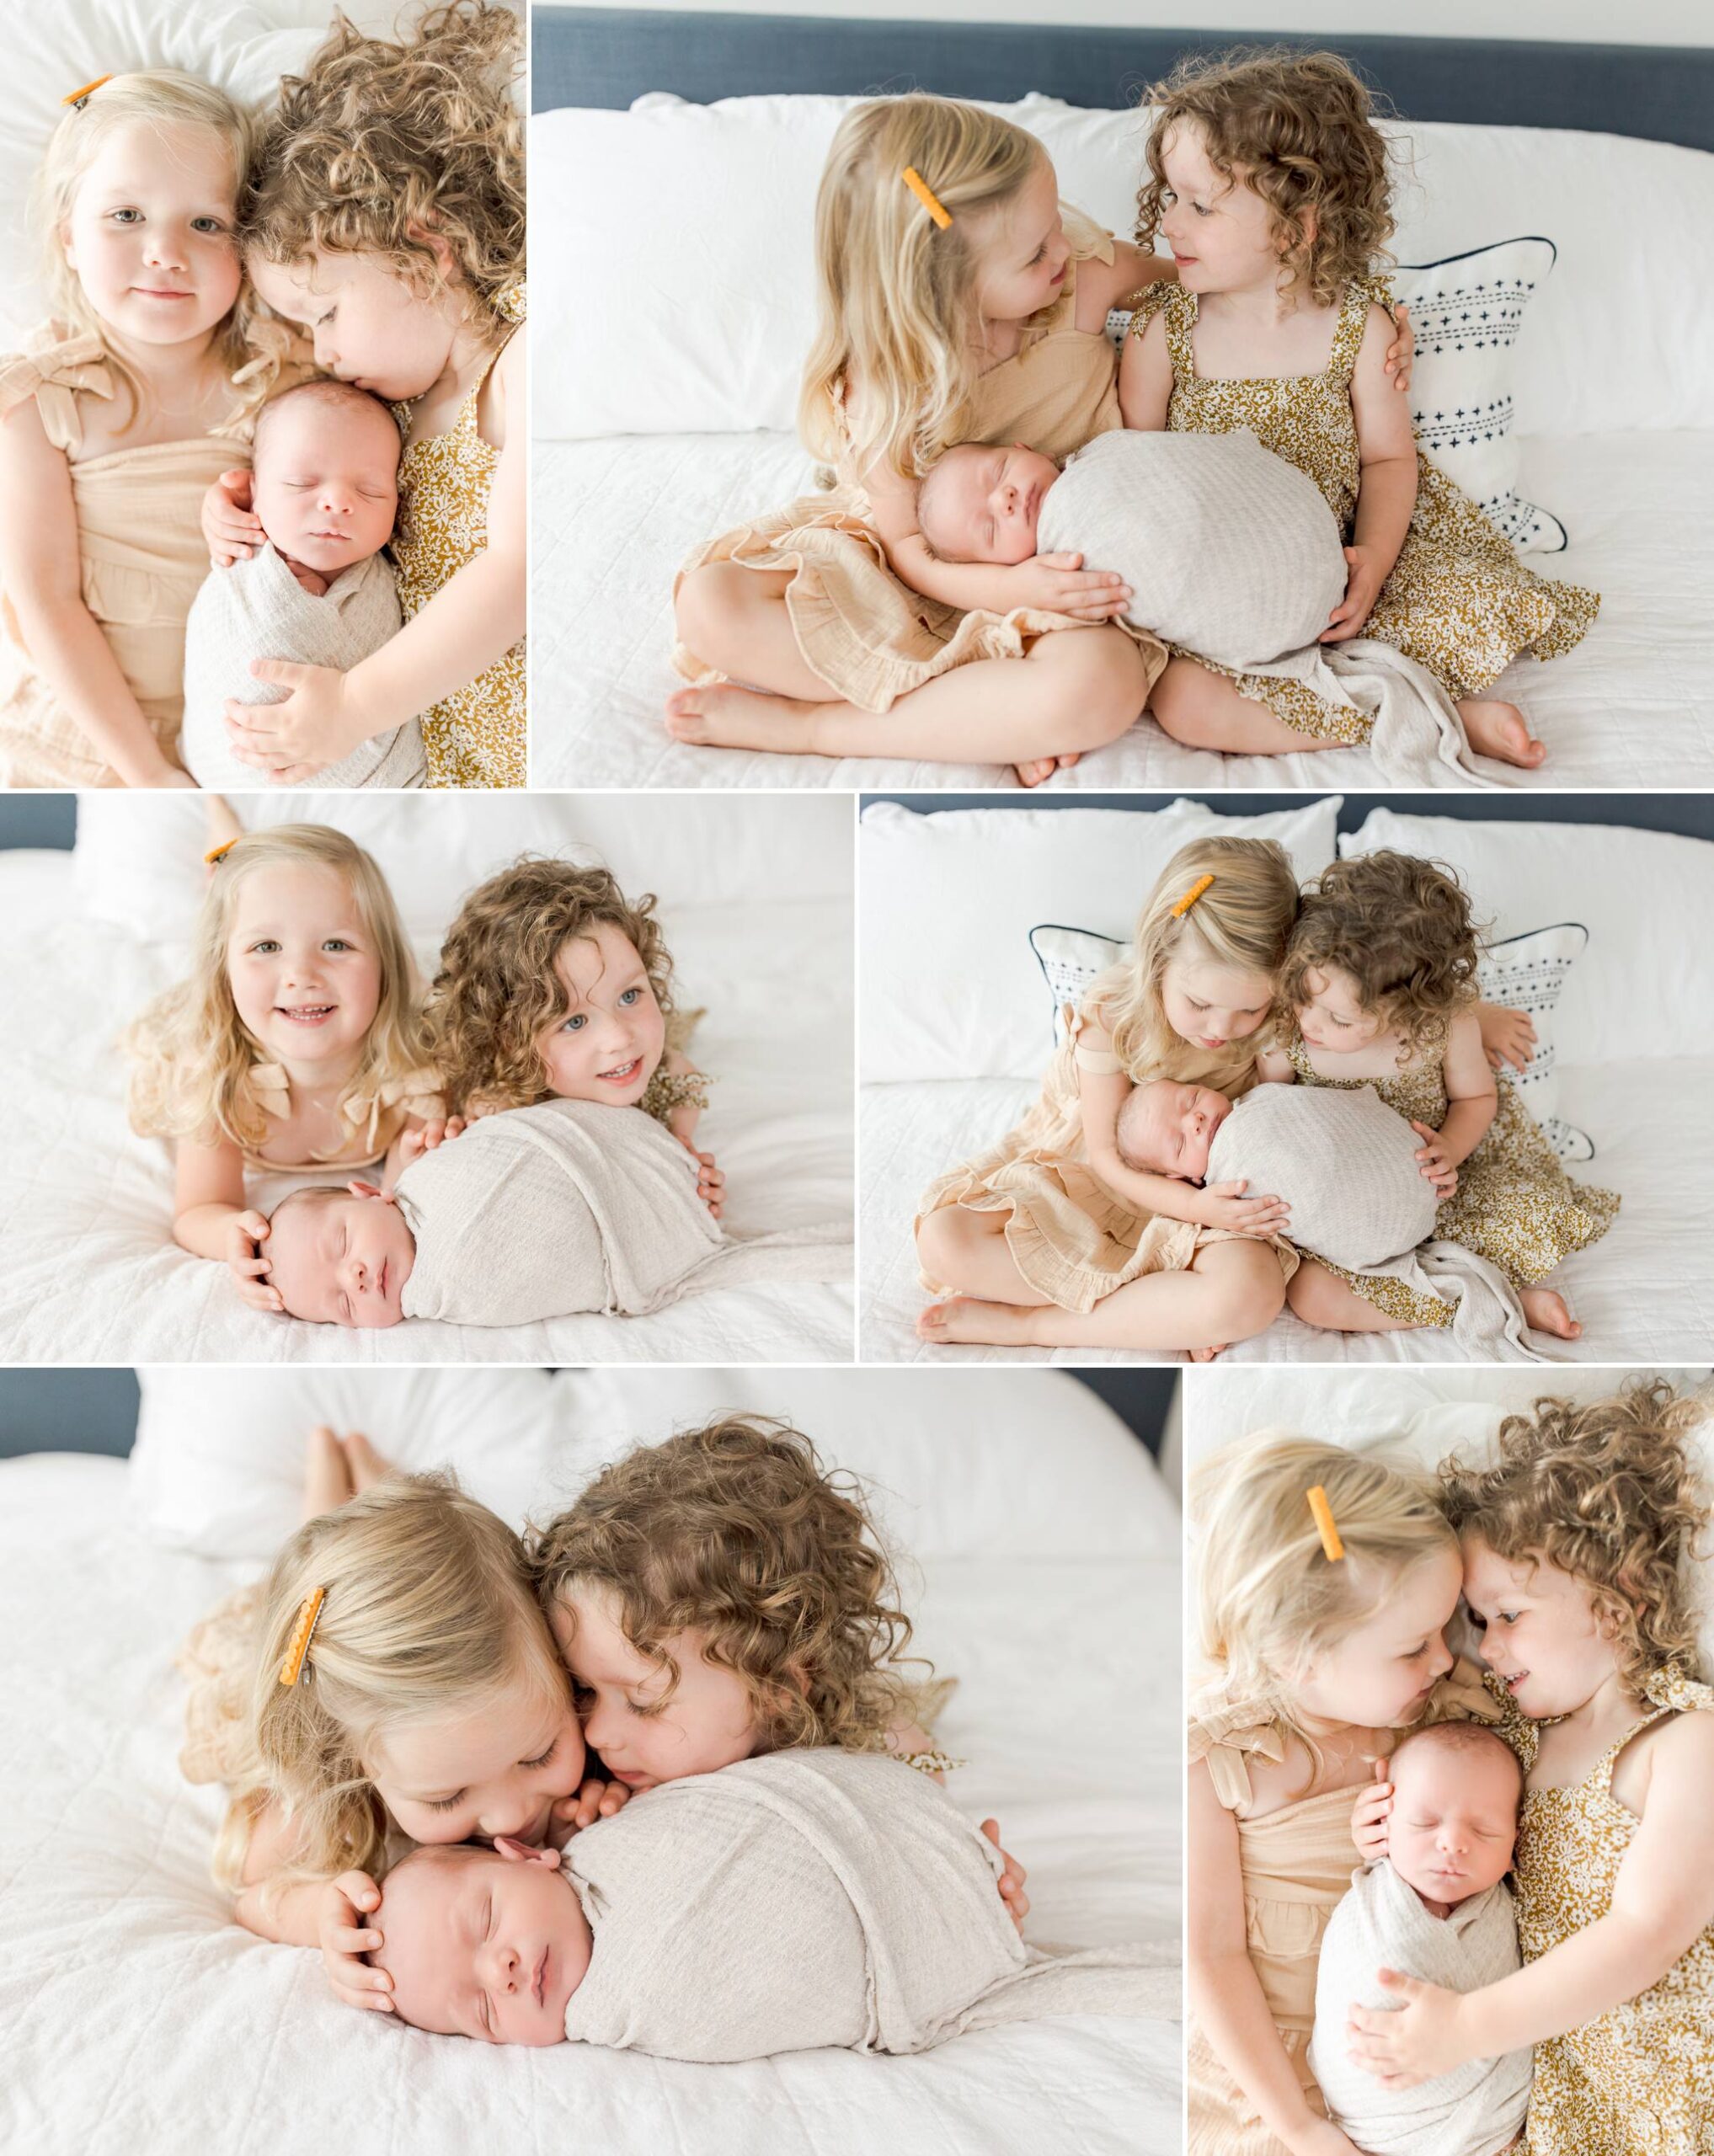 Two sisters holding and kissing their newborn baby brother.